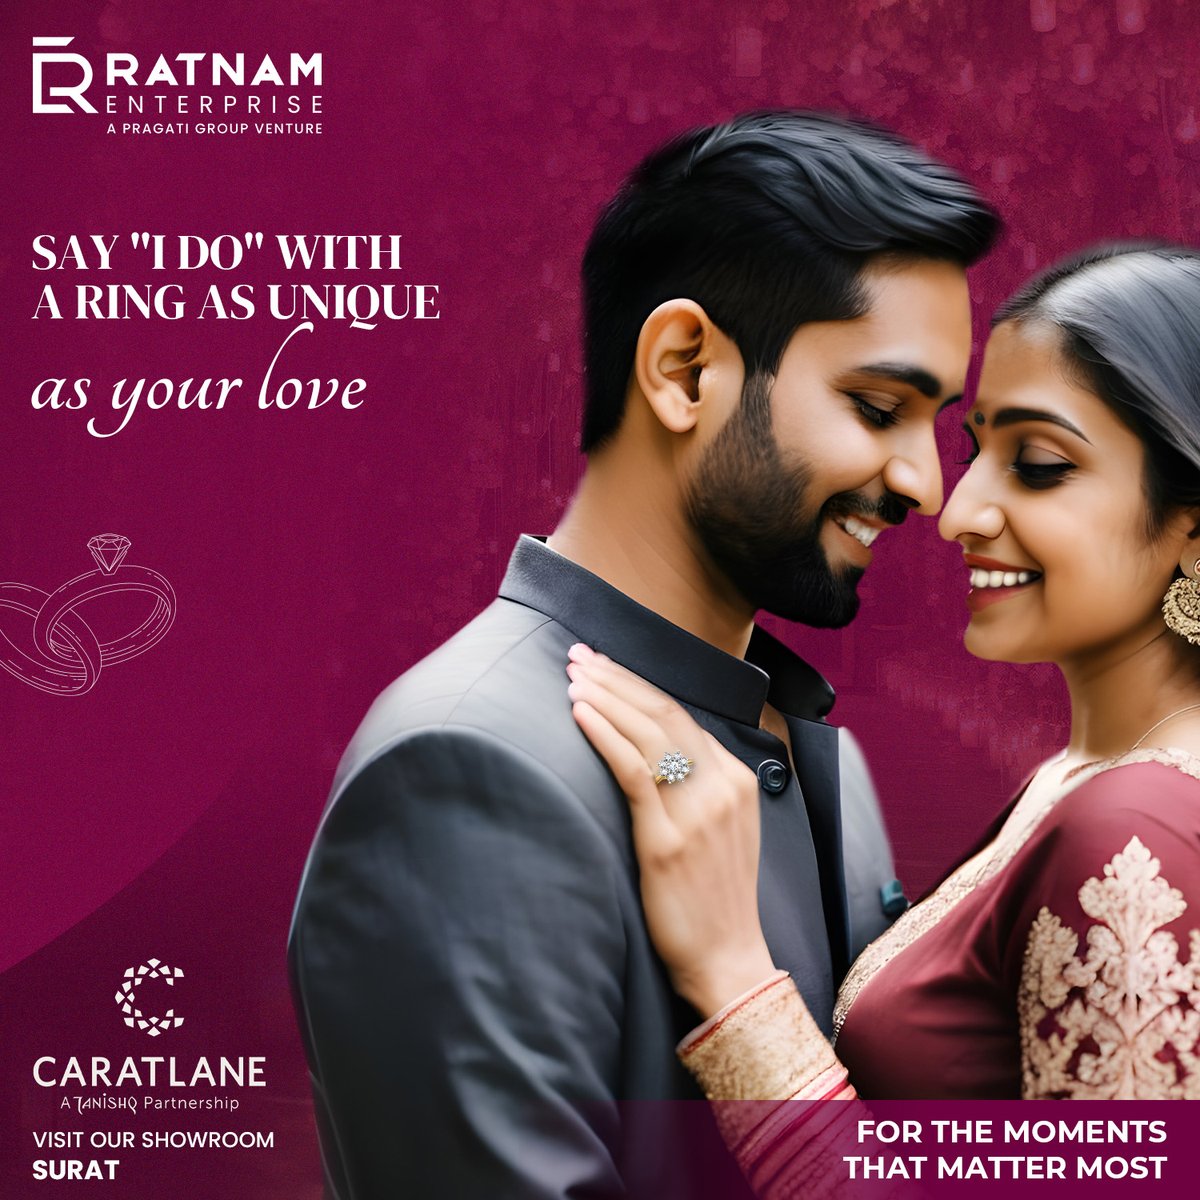 Love stories are unique, your ring should be too. Find the perfect engagement ring at caratlane to celebrate your one-of-a-kind love.

#RatnamEnterprise #CaratLane #EngagementRing #UniqueLove #OneOfAKind #LoveStory #PerfectRing #ForeverTogether #CelebrateLove  #Enterprise